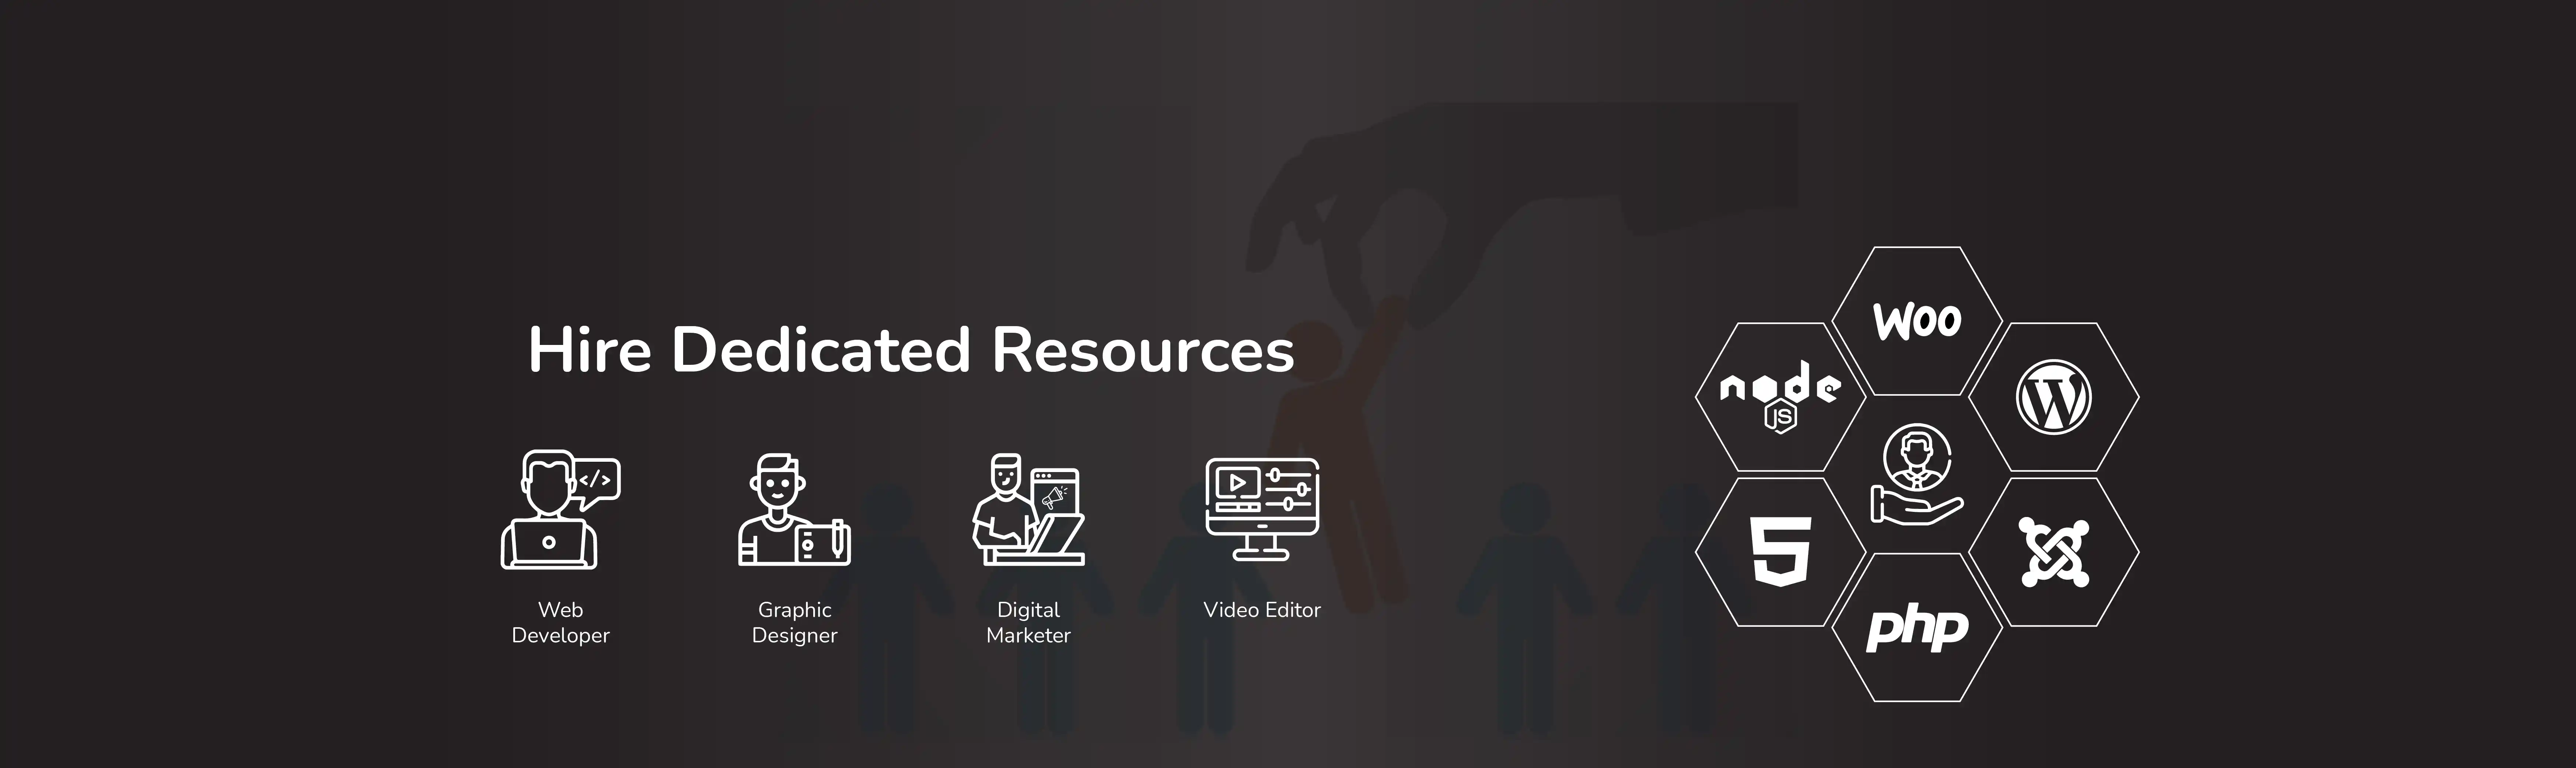 hire dedicated resources home banner